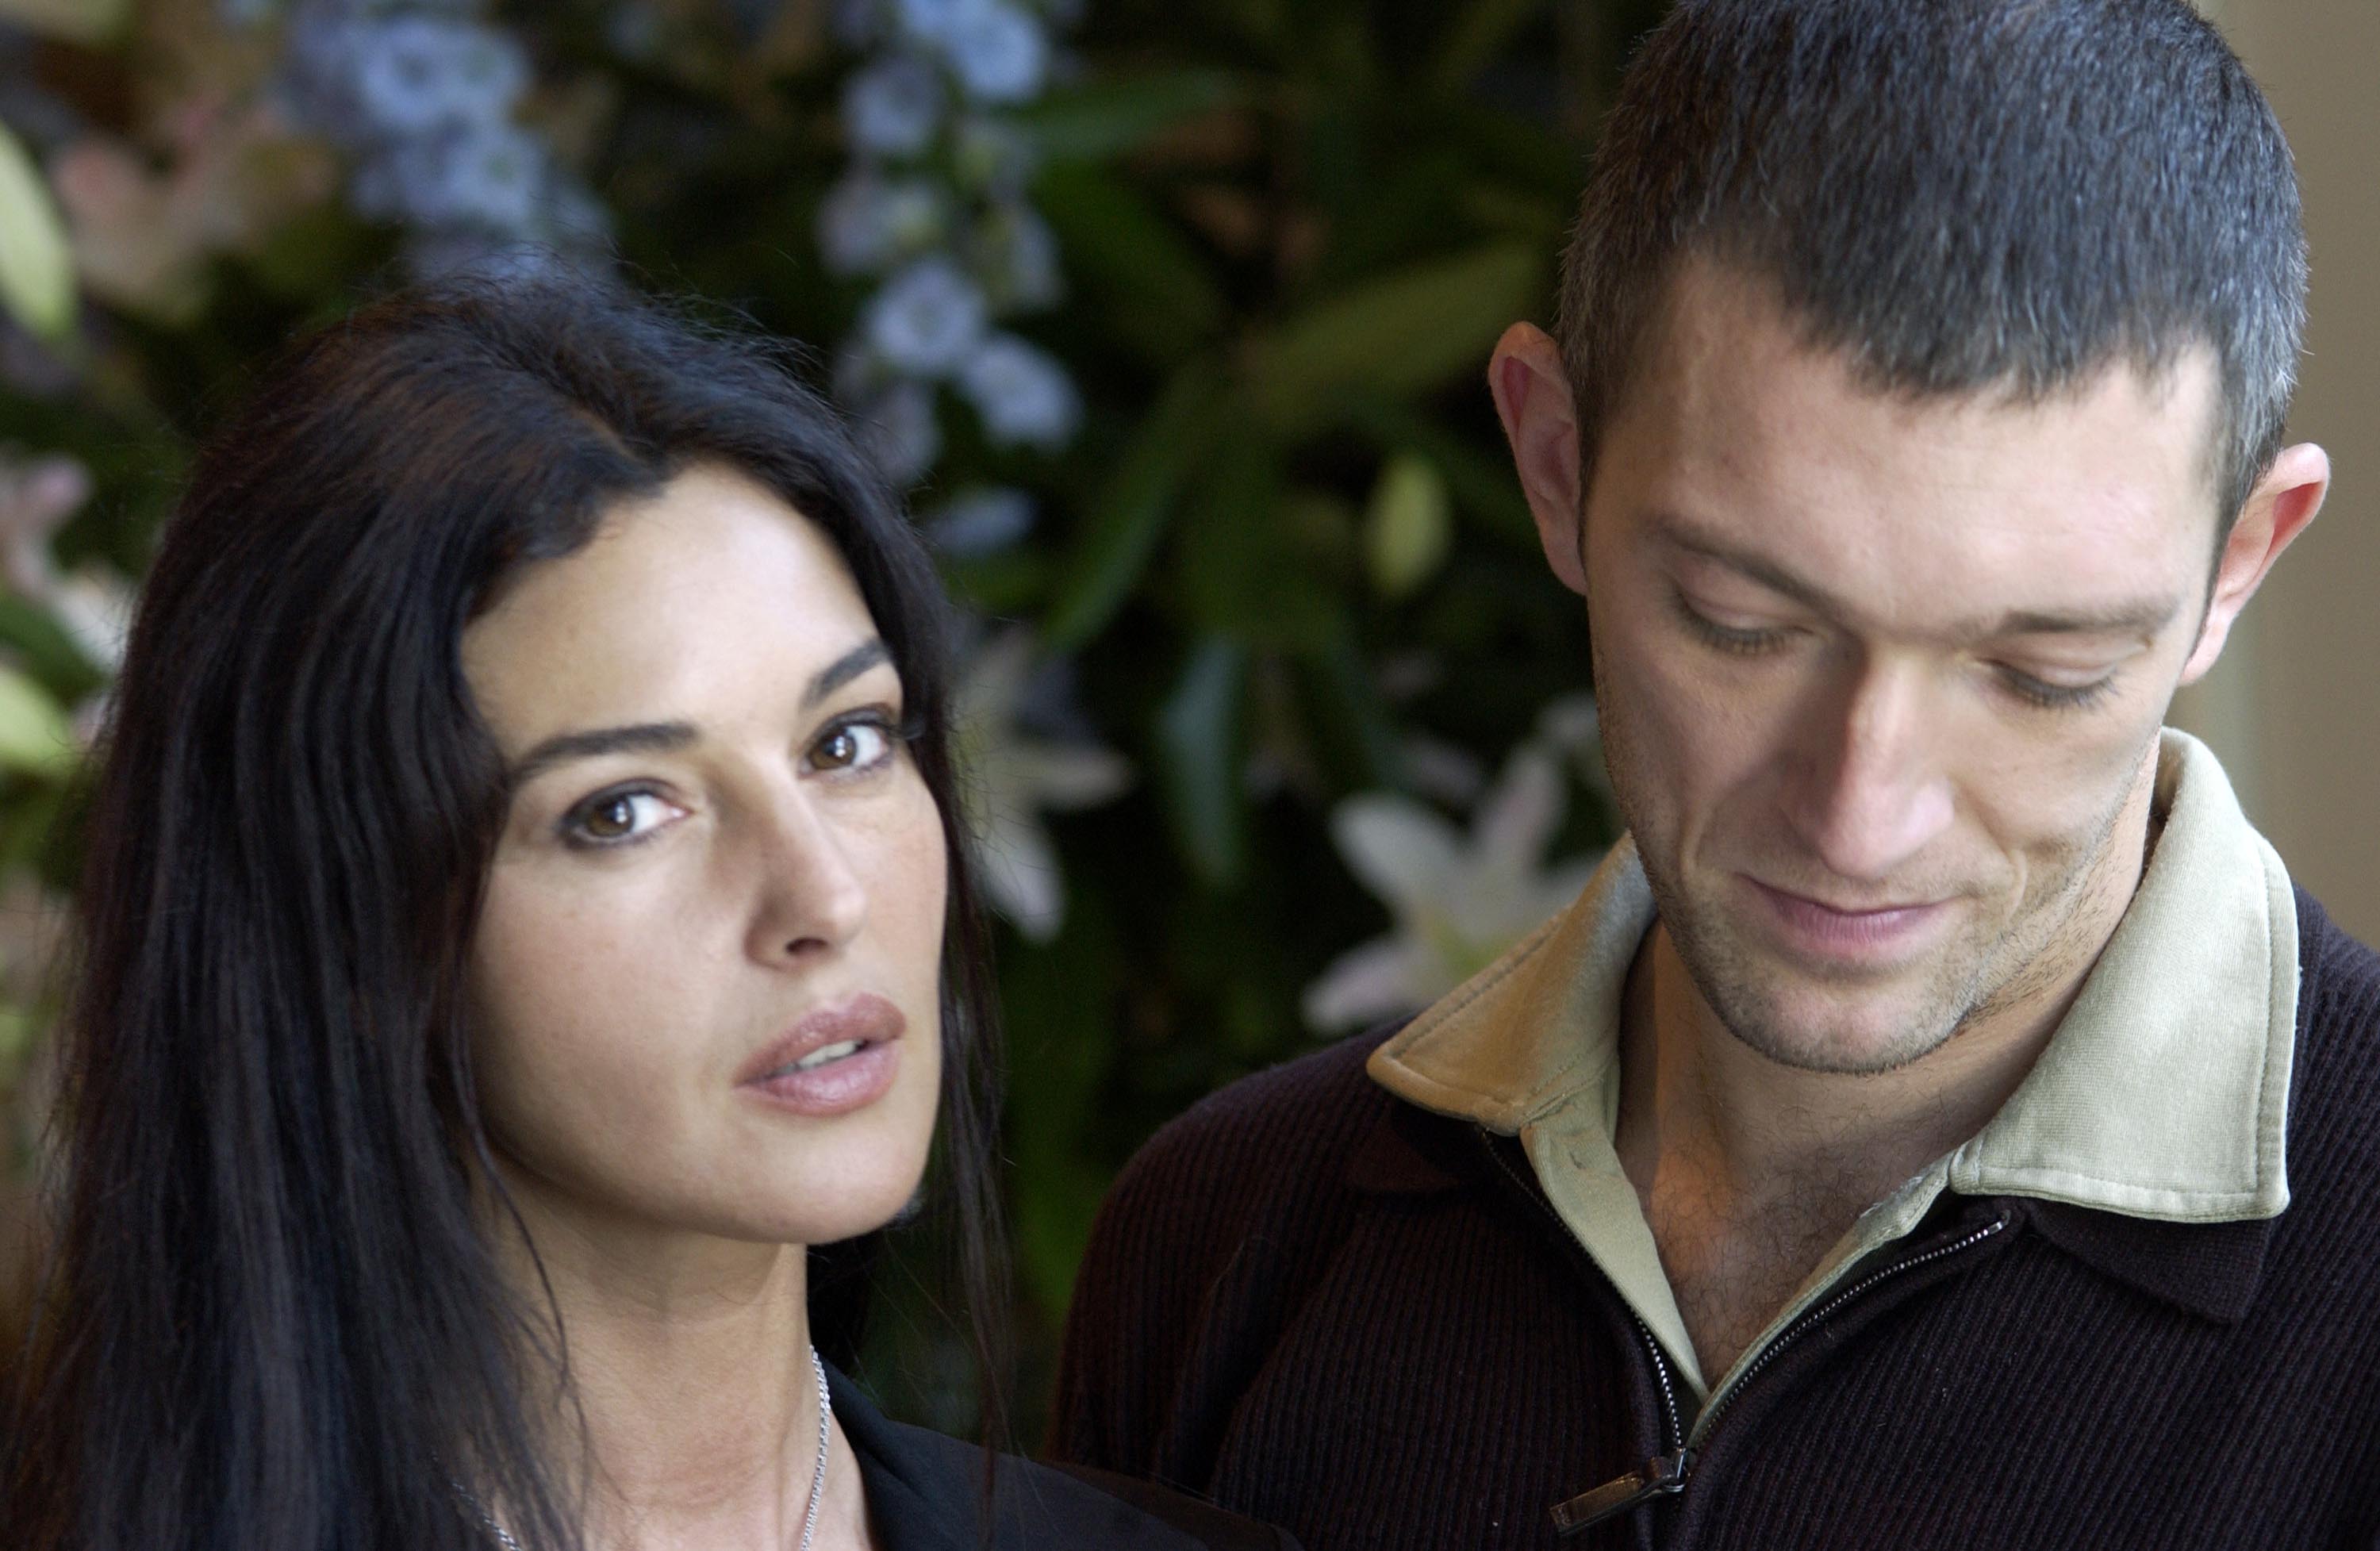 Monica Bellucci & Vincent Cassel during Toronto 2001 - The Brotherhood of the Wolf Portraits at Hotel Inter-Continental in Toronto, Canada | Source: Getty Images